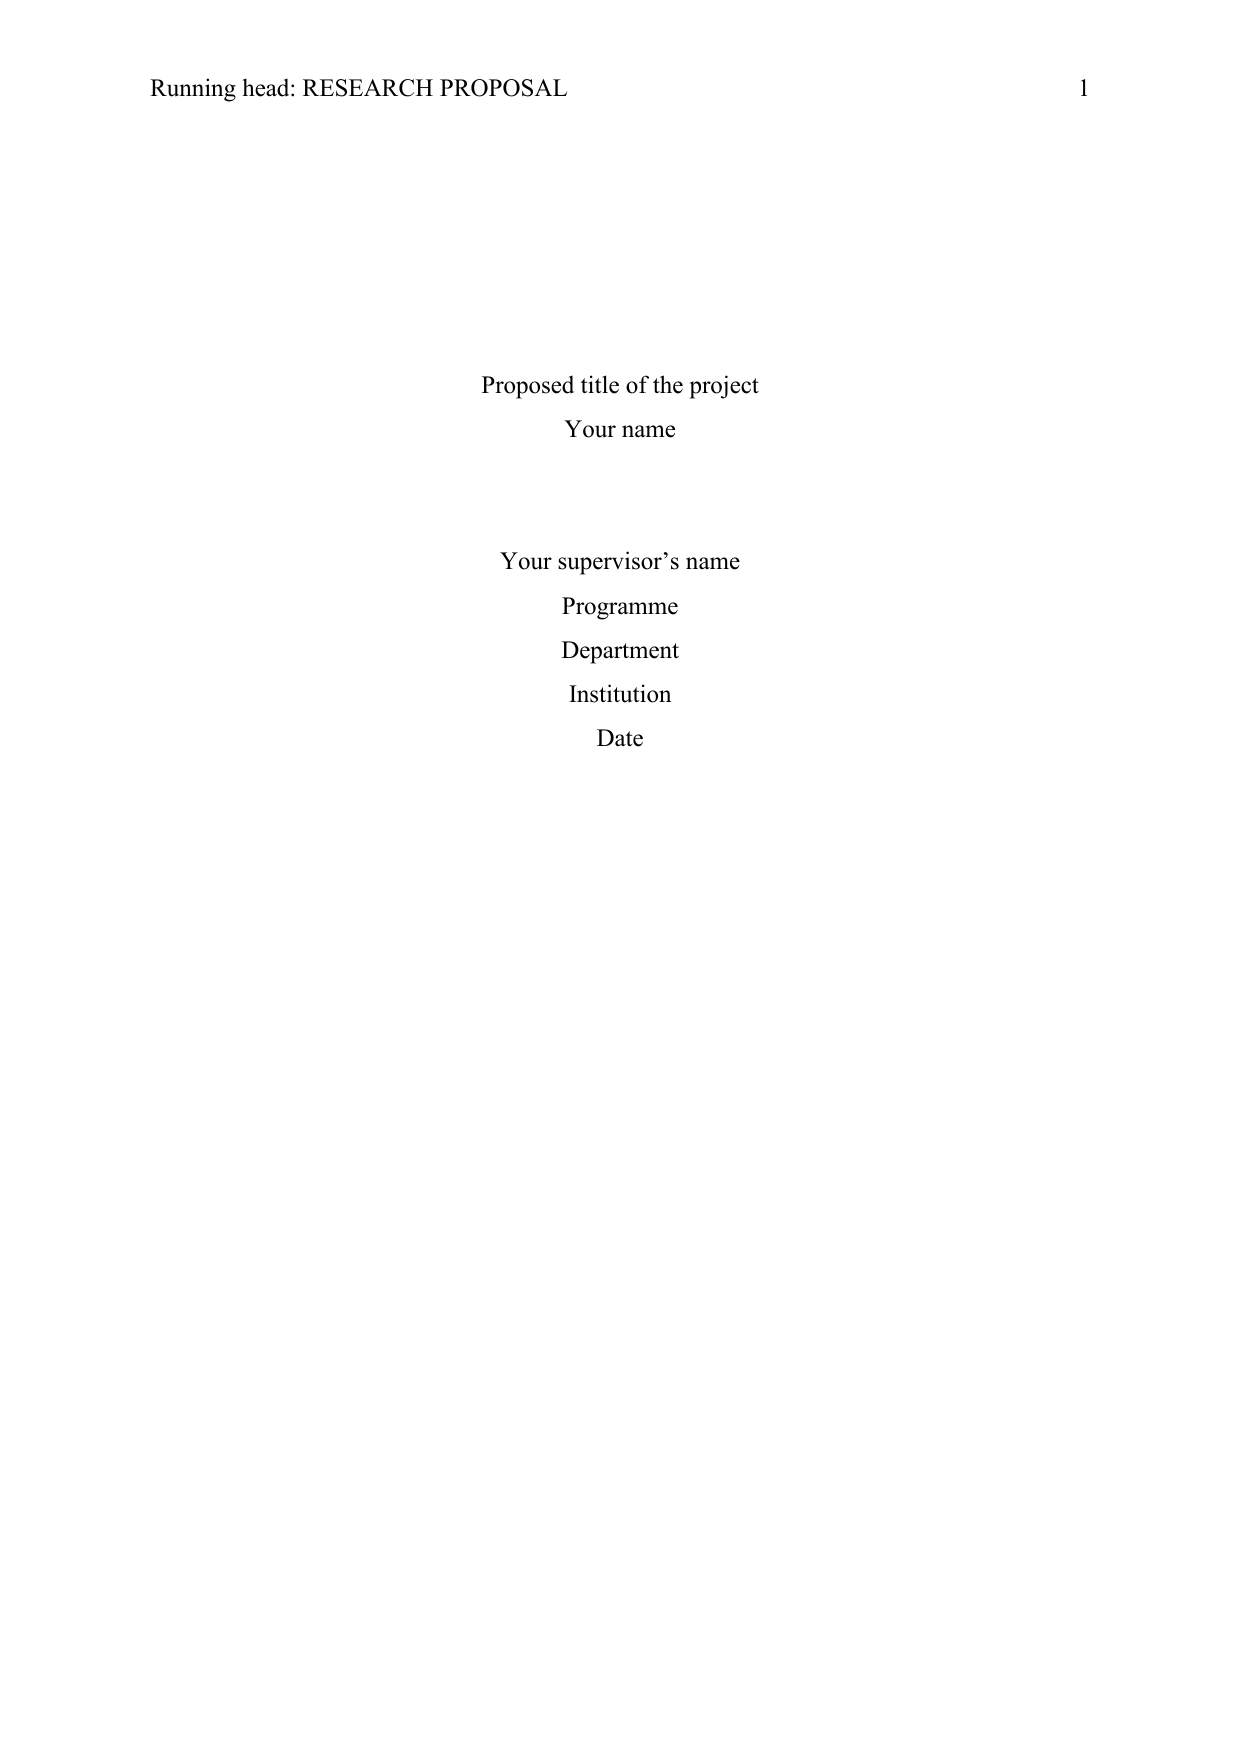 cover page of the research proposal